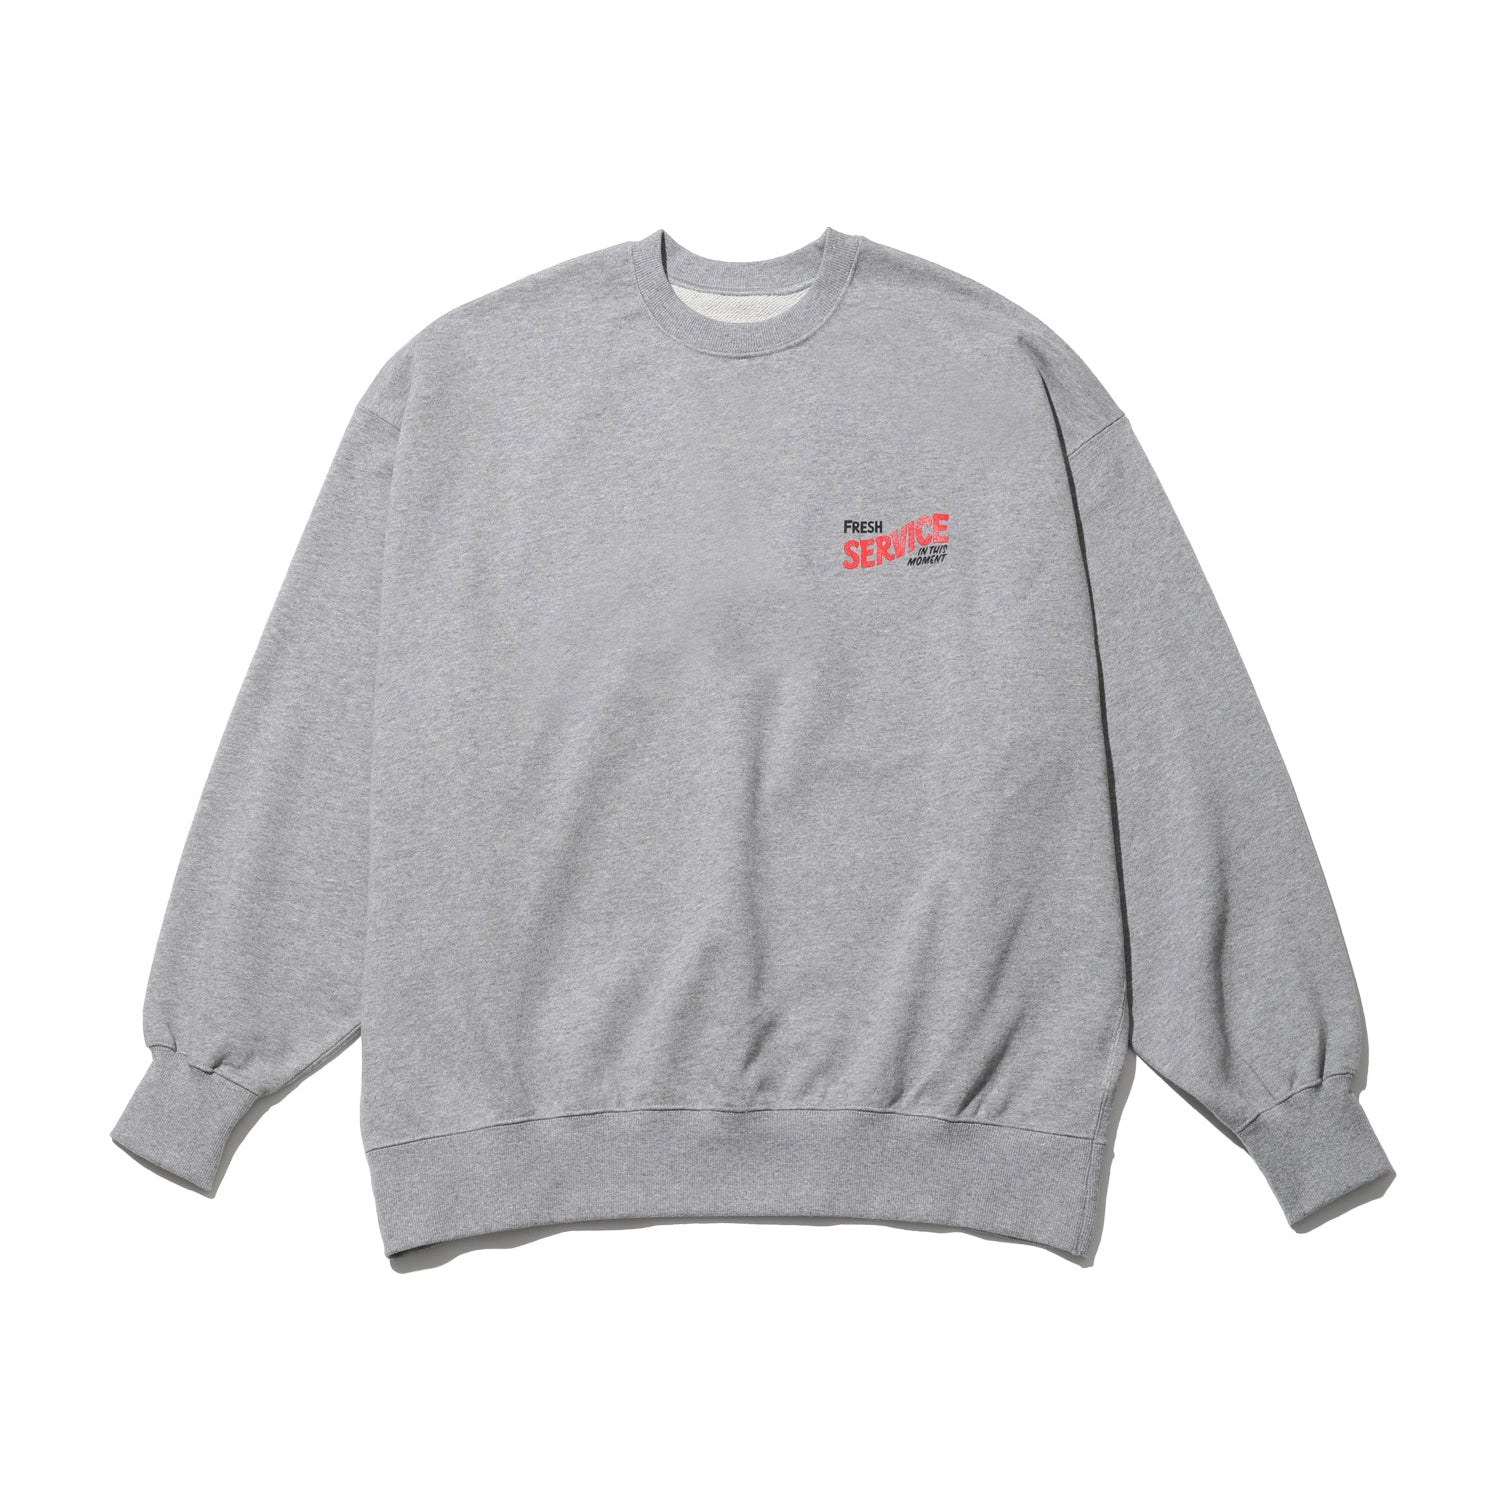 CORPORATE PRINTED CREW NECK SWEAT “All Day All Night”